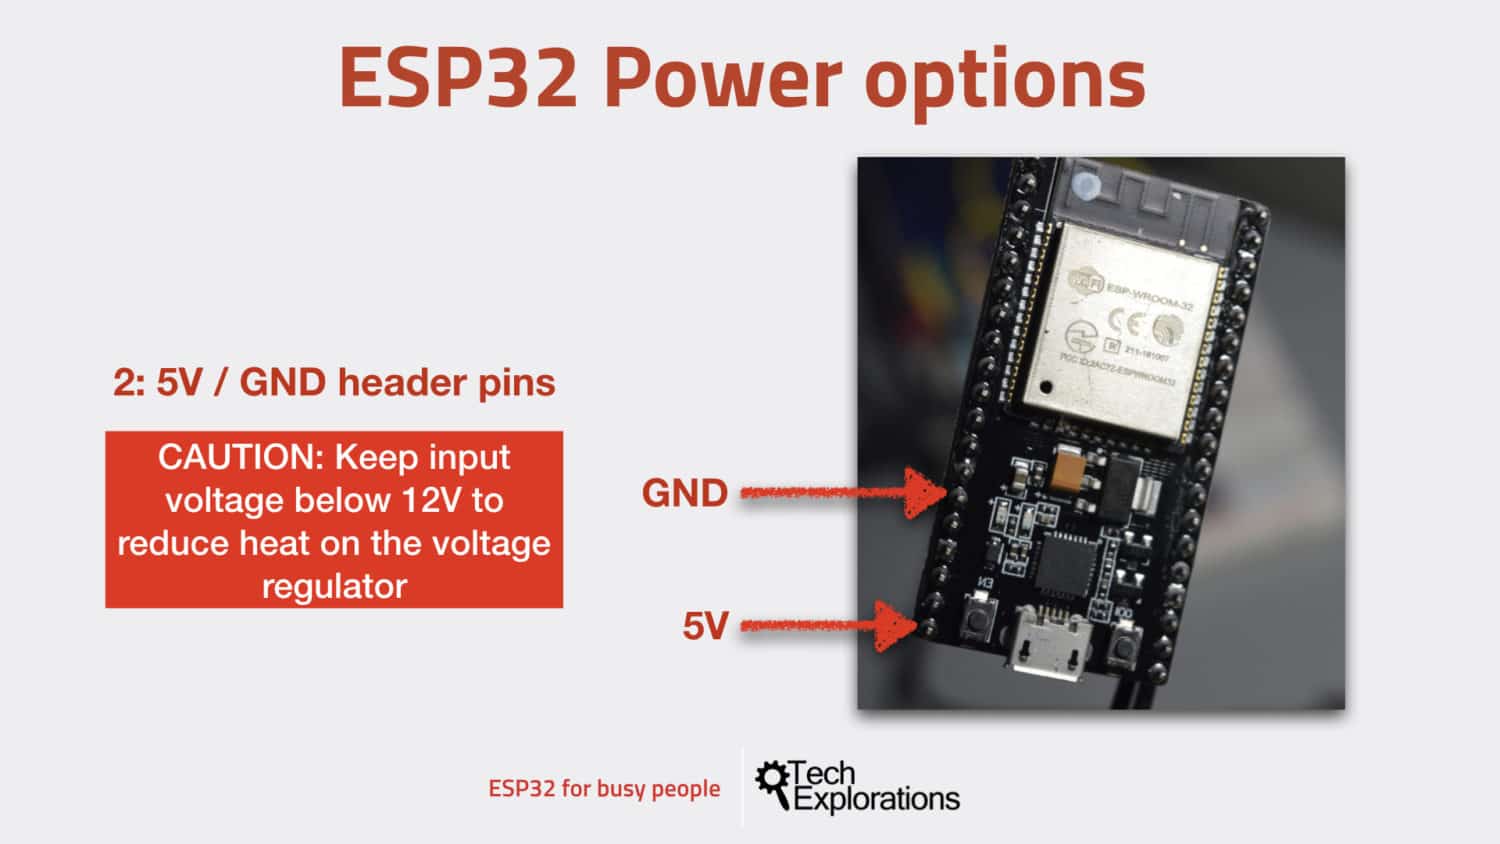 How do I power My esp32 with a battery? I have destroyed many